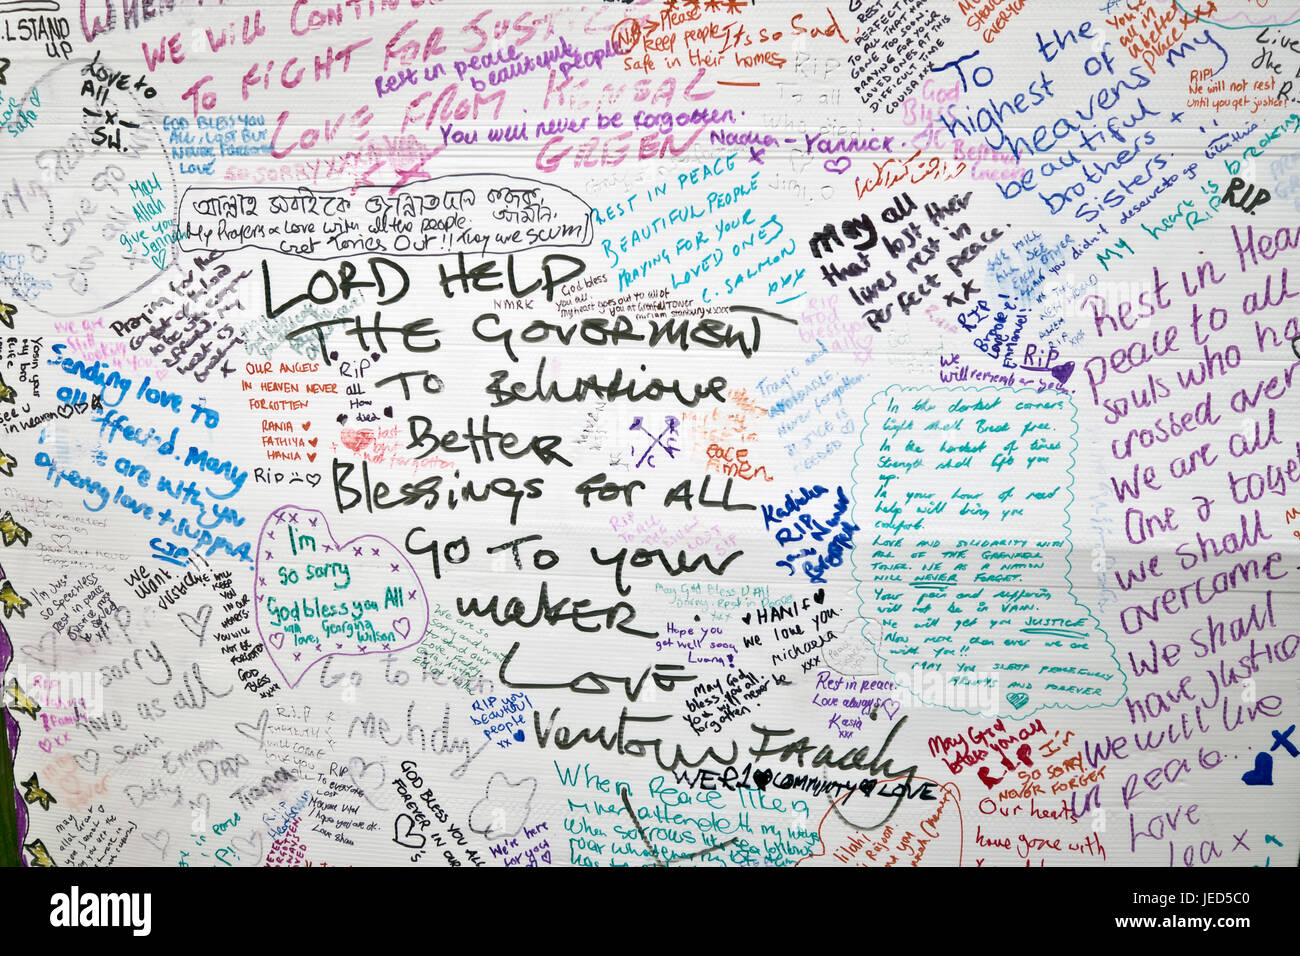 Wall of condolence in the aftermath of the fire that destroyed the 24-story Grenfell Tower in North Kensington, London on 14th June 2017.  The death toll officially at 75 but will no doubt rise to three figures. Stock Photo